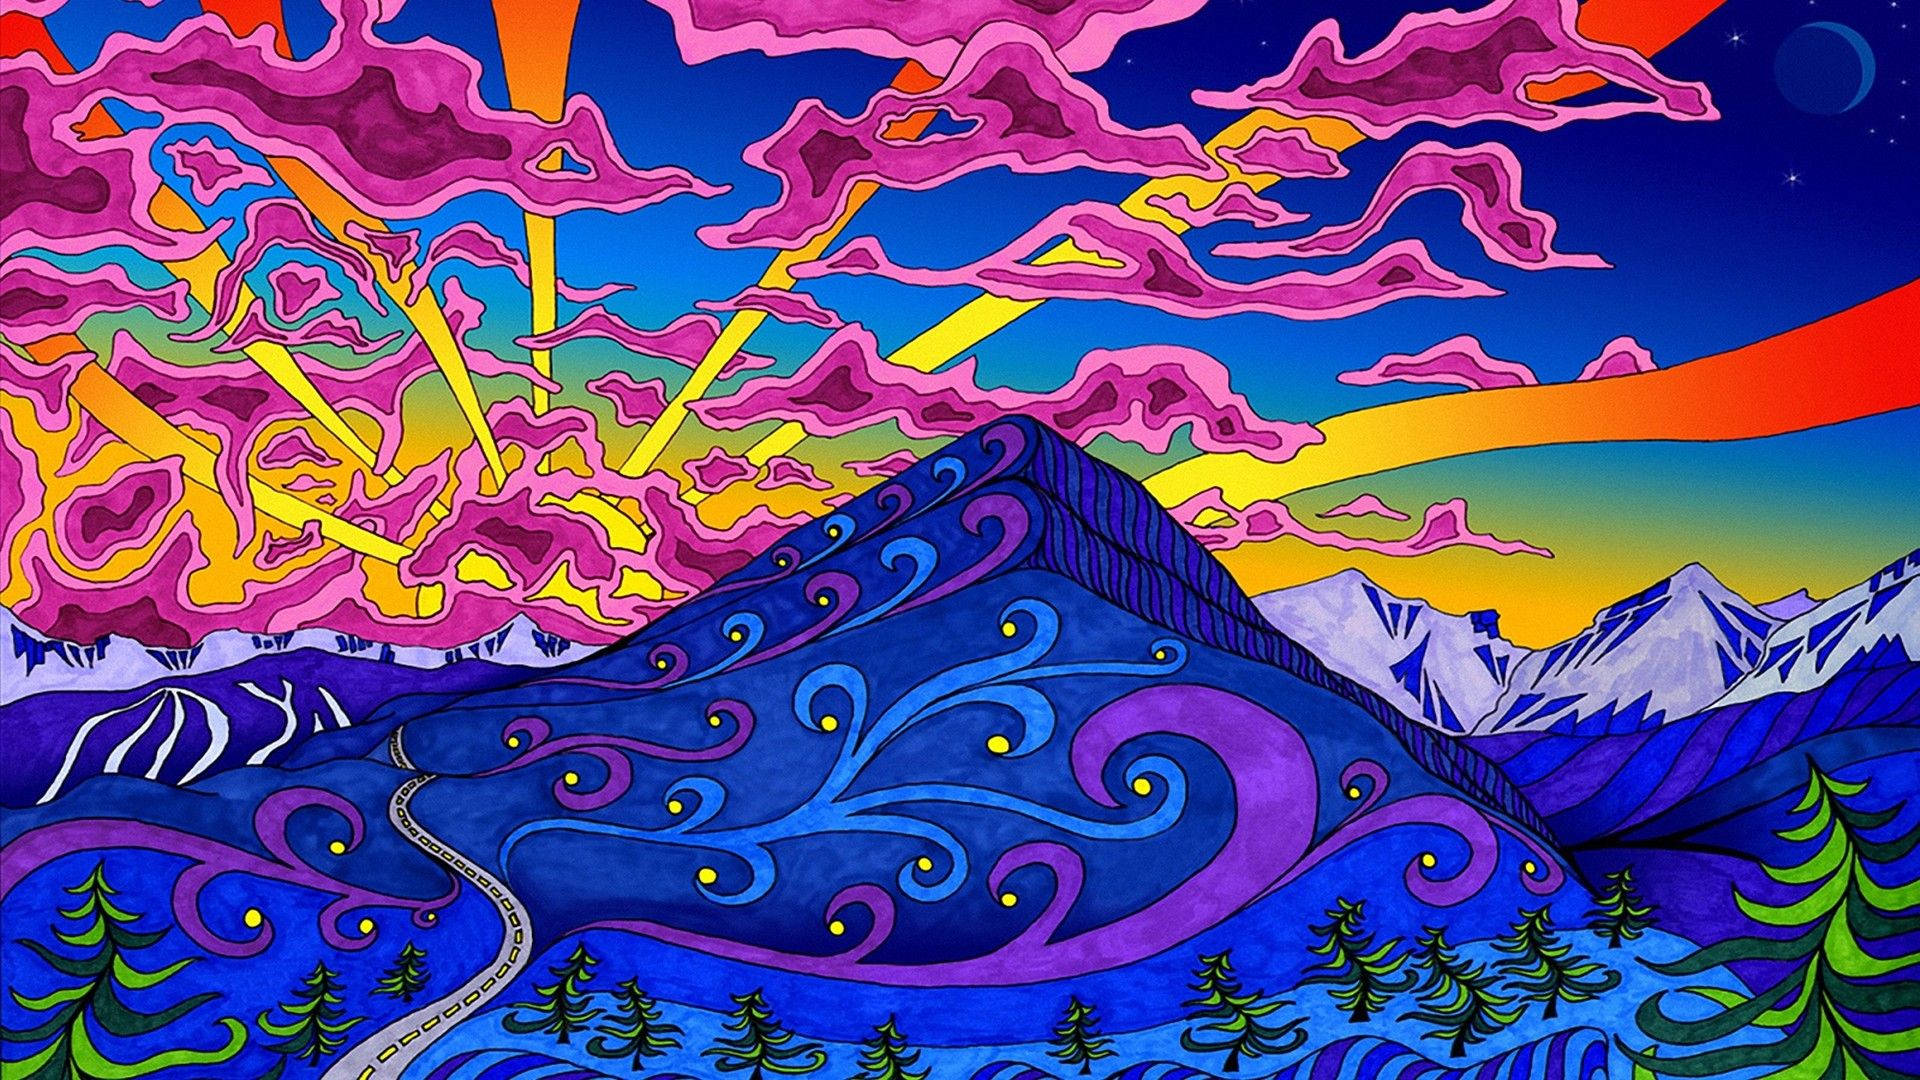 Psychedelic mountain art in vibrant blue colors wallpaper.